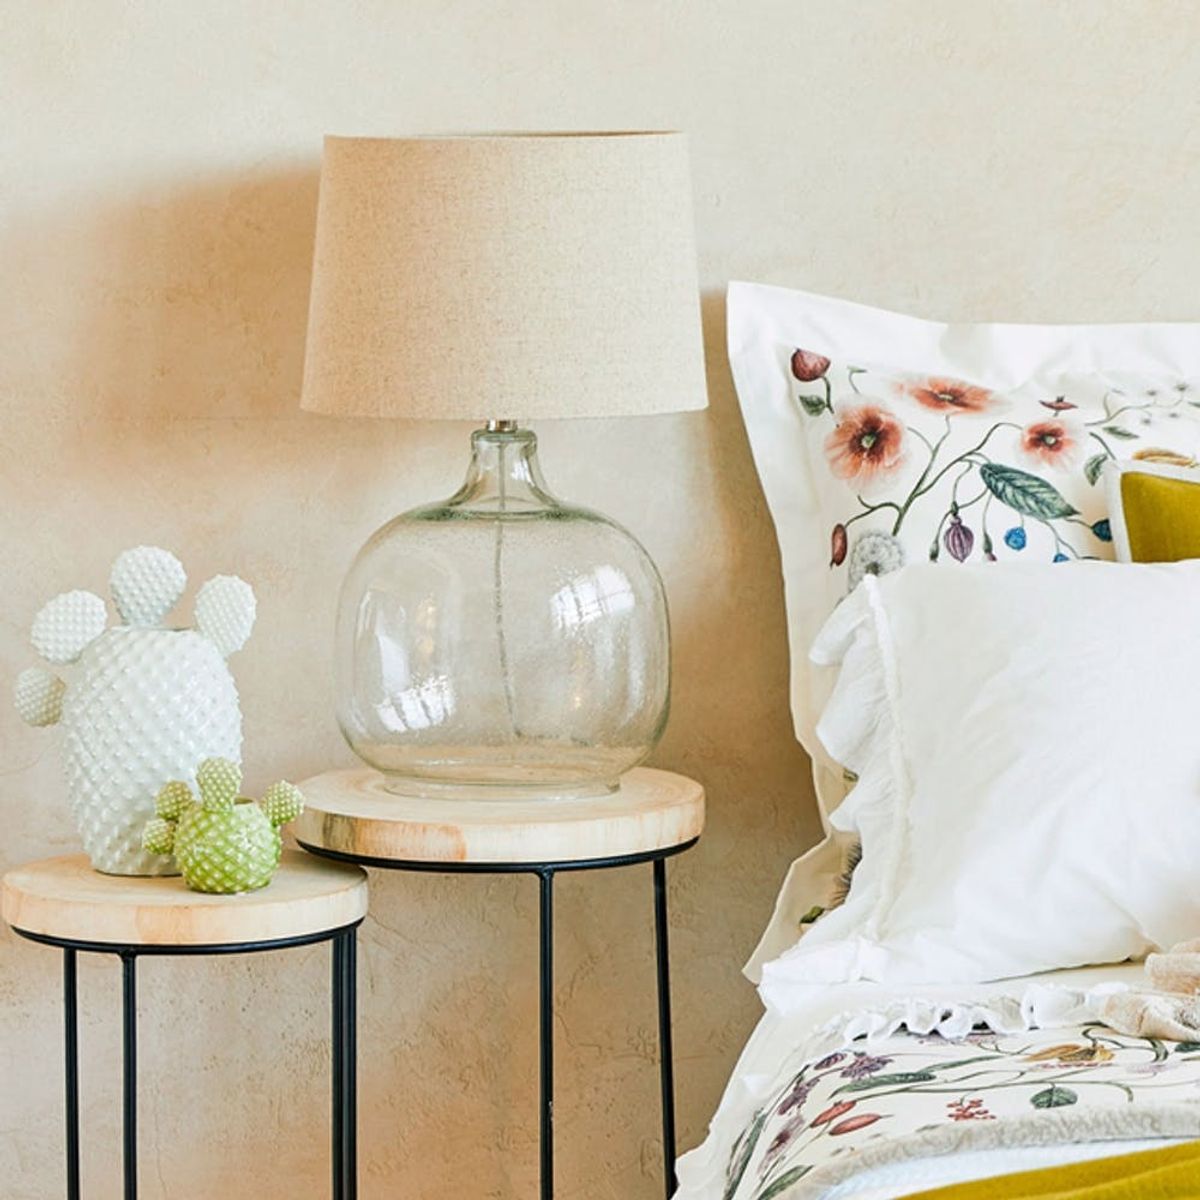 Everything You Need from Zara’s Botanical Autumn Home Collection